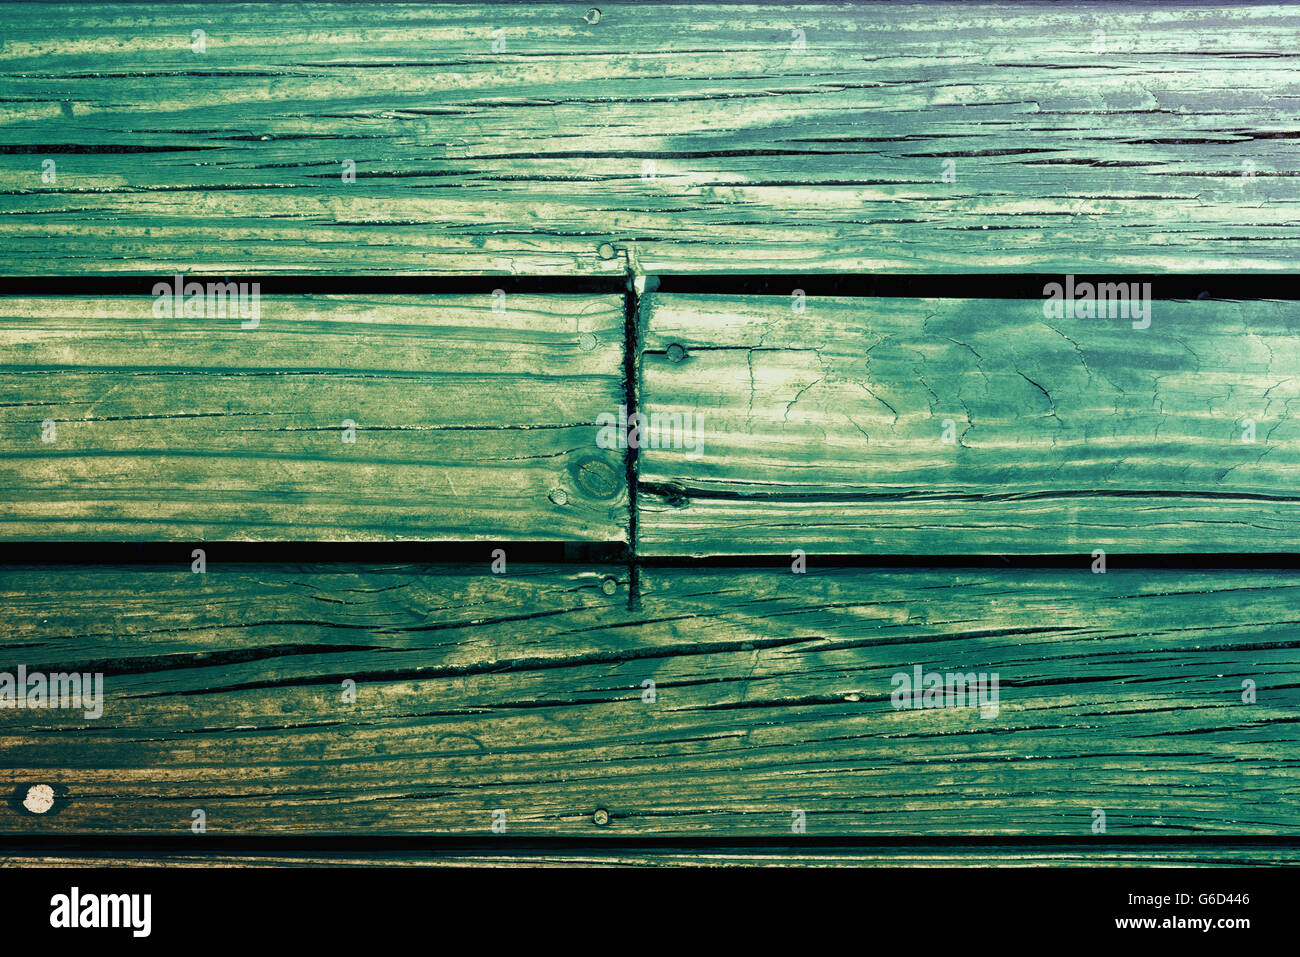 Close up top view of old wood panel floor surface, hipster vintage style rustic background texture. Stock Photo